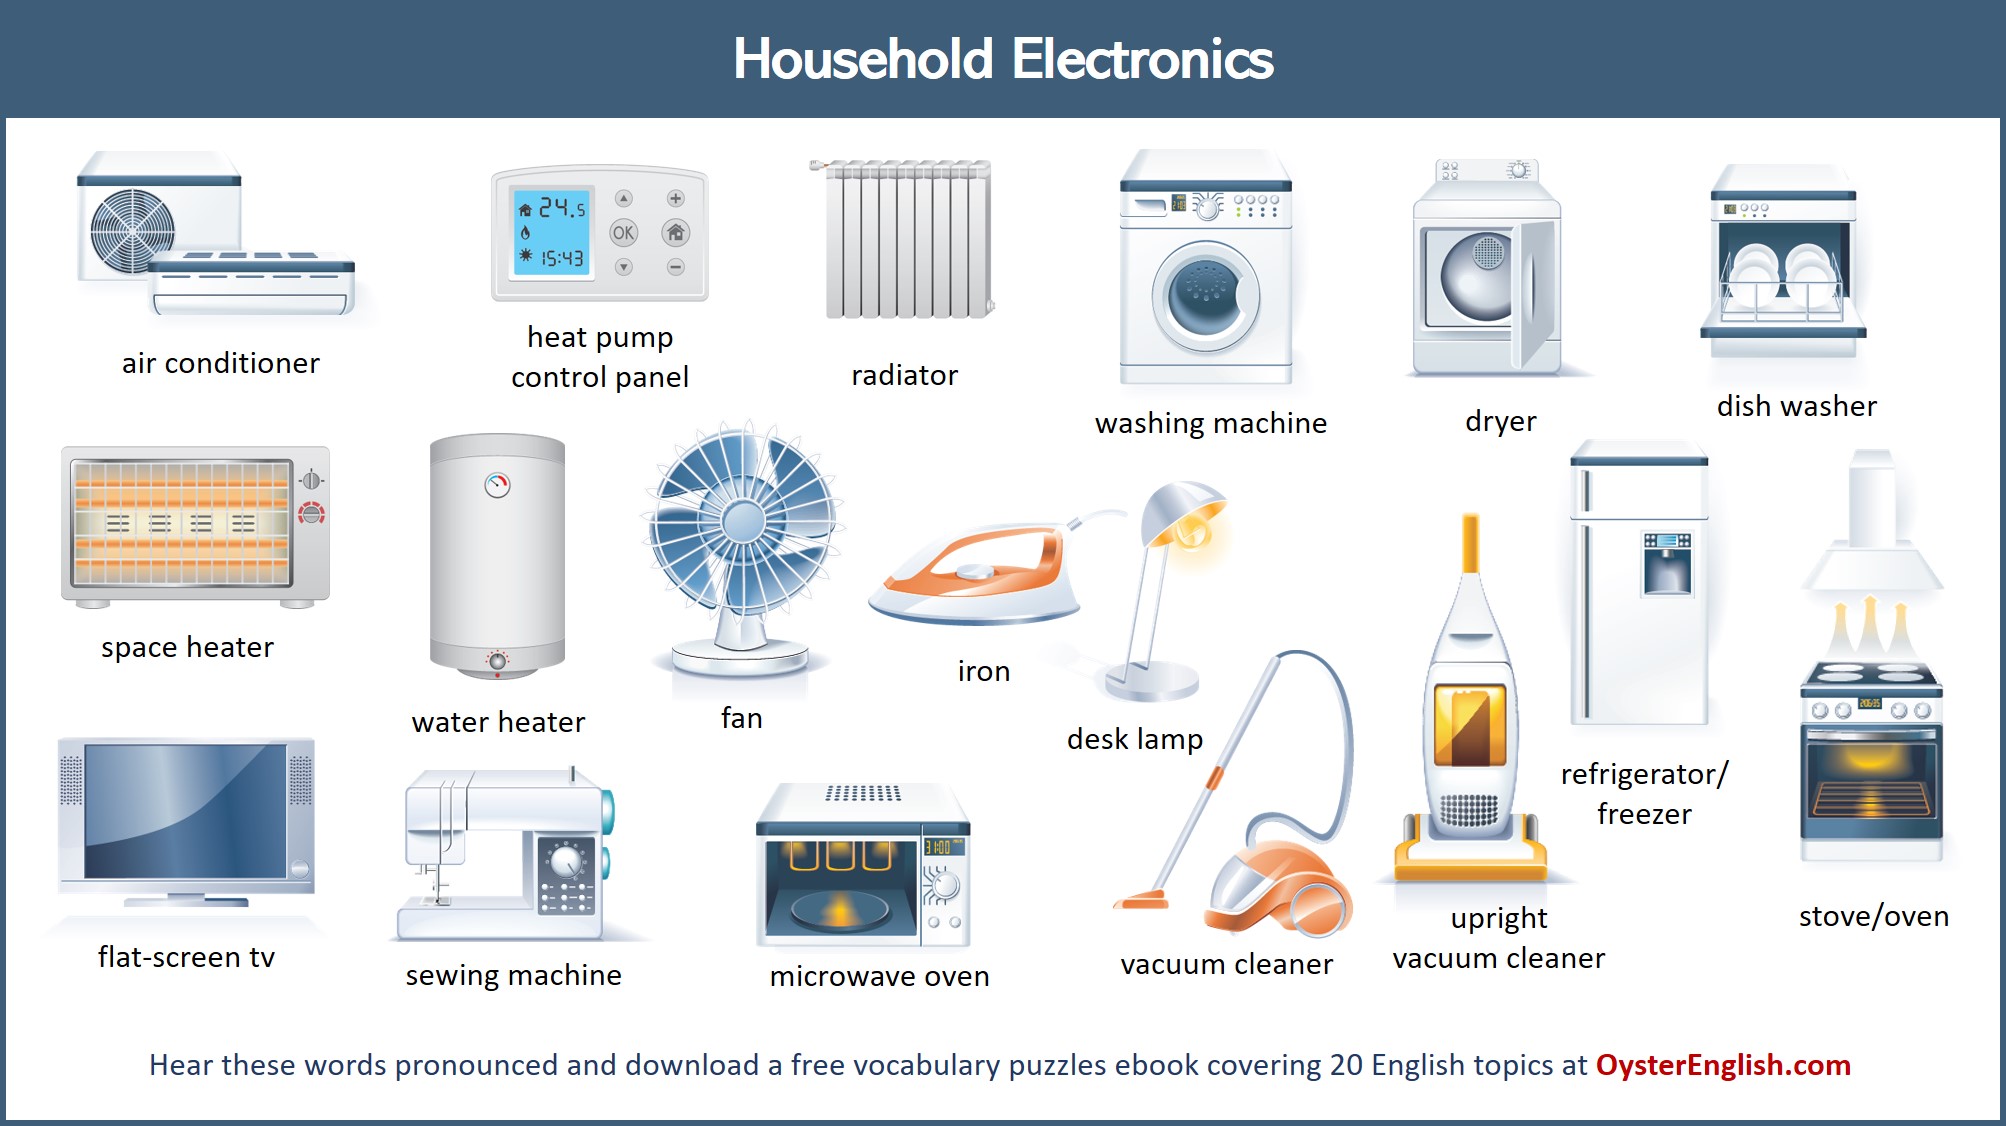 https://www.oysterenglish.com/images/household-electronics-vocabulary.jpg